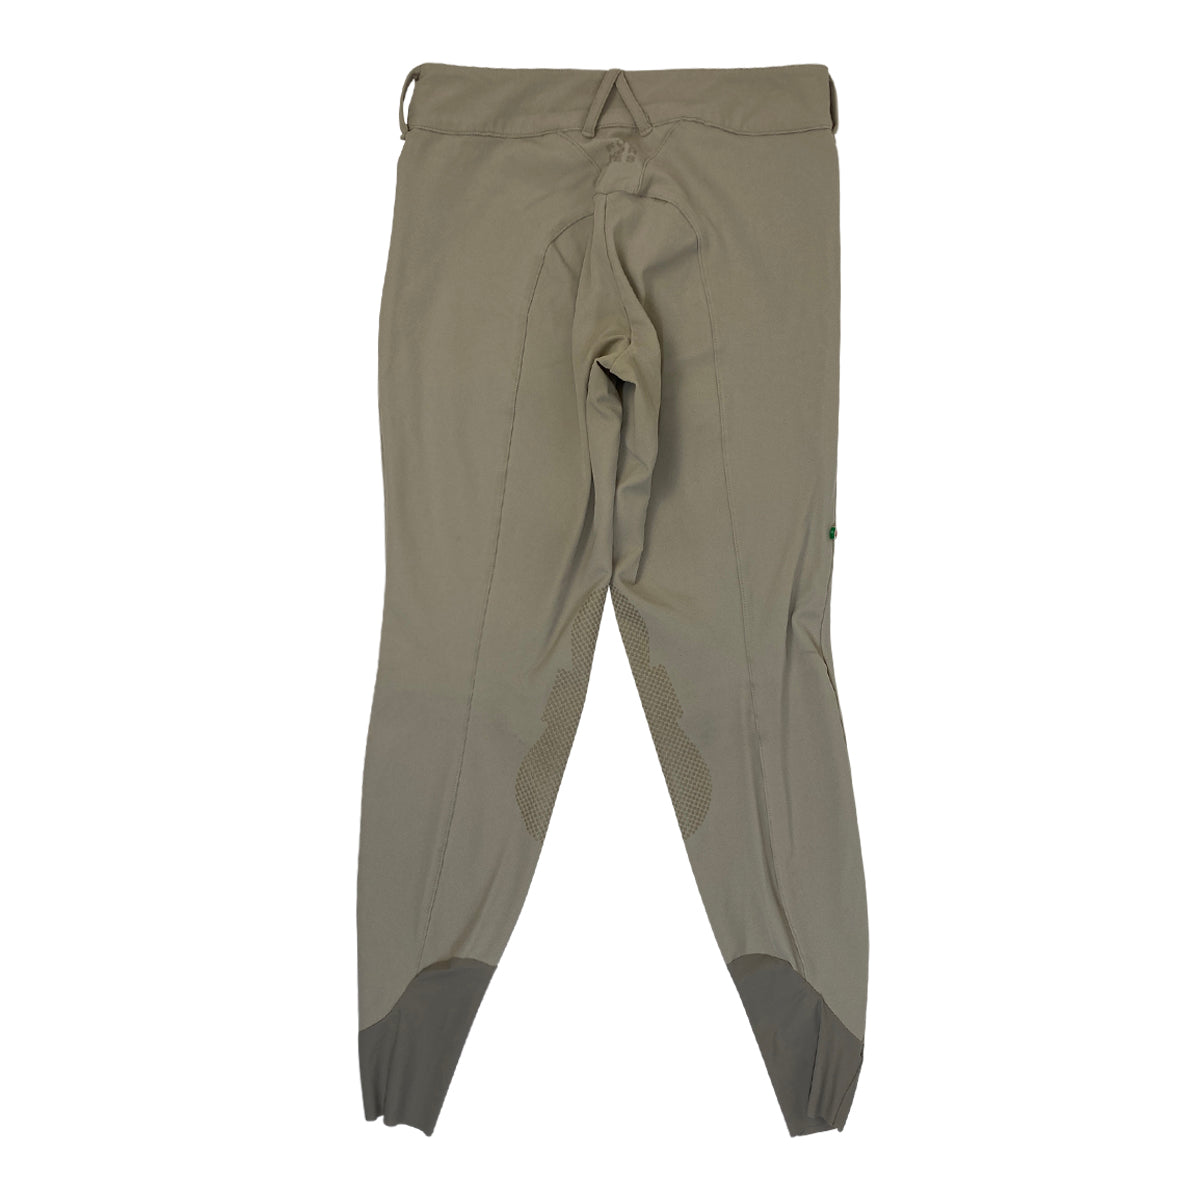 For Horses 'Remie' Breeches in Tan